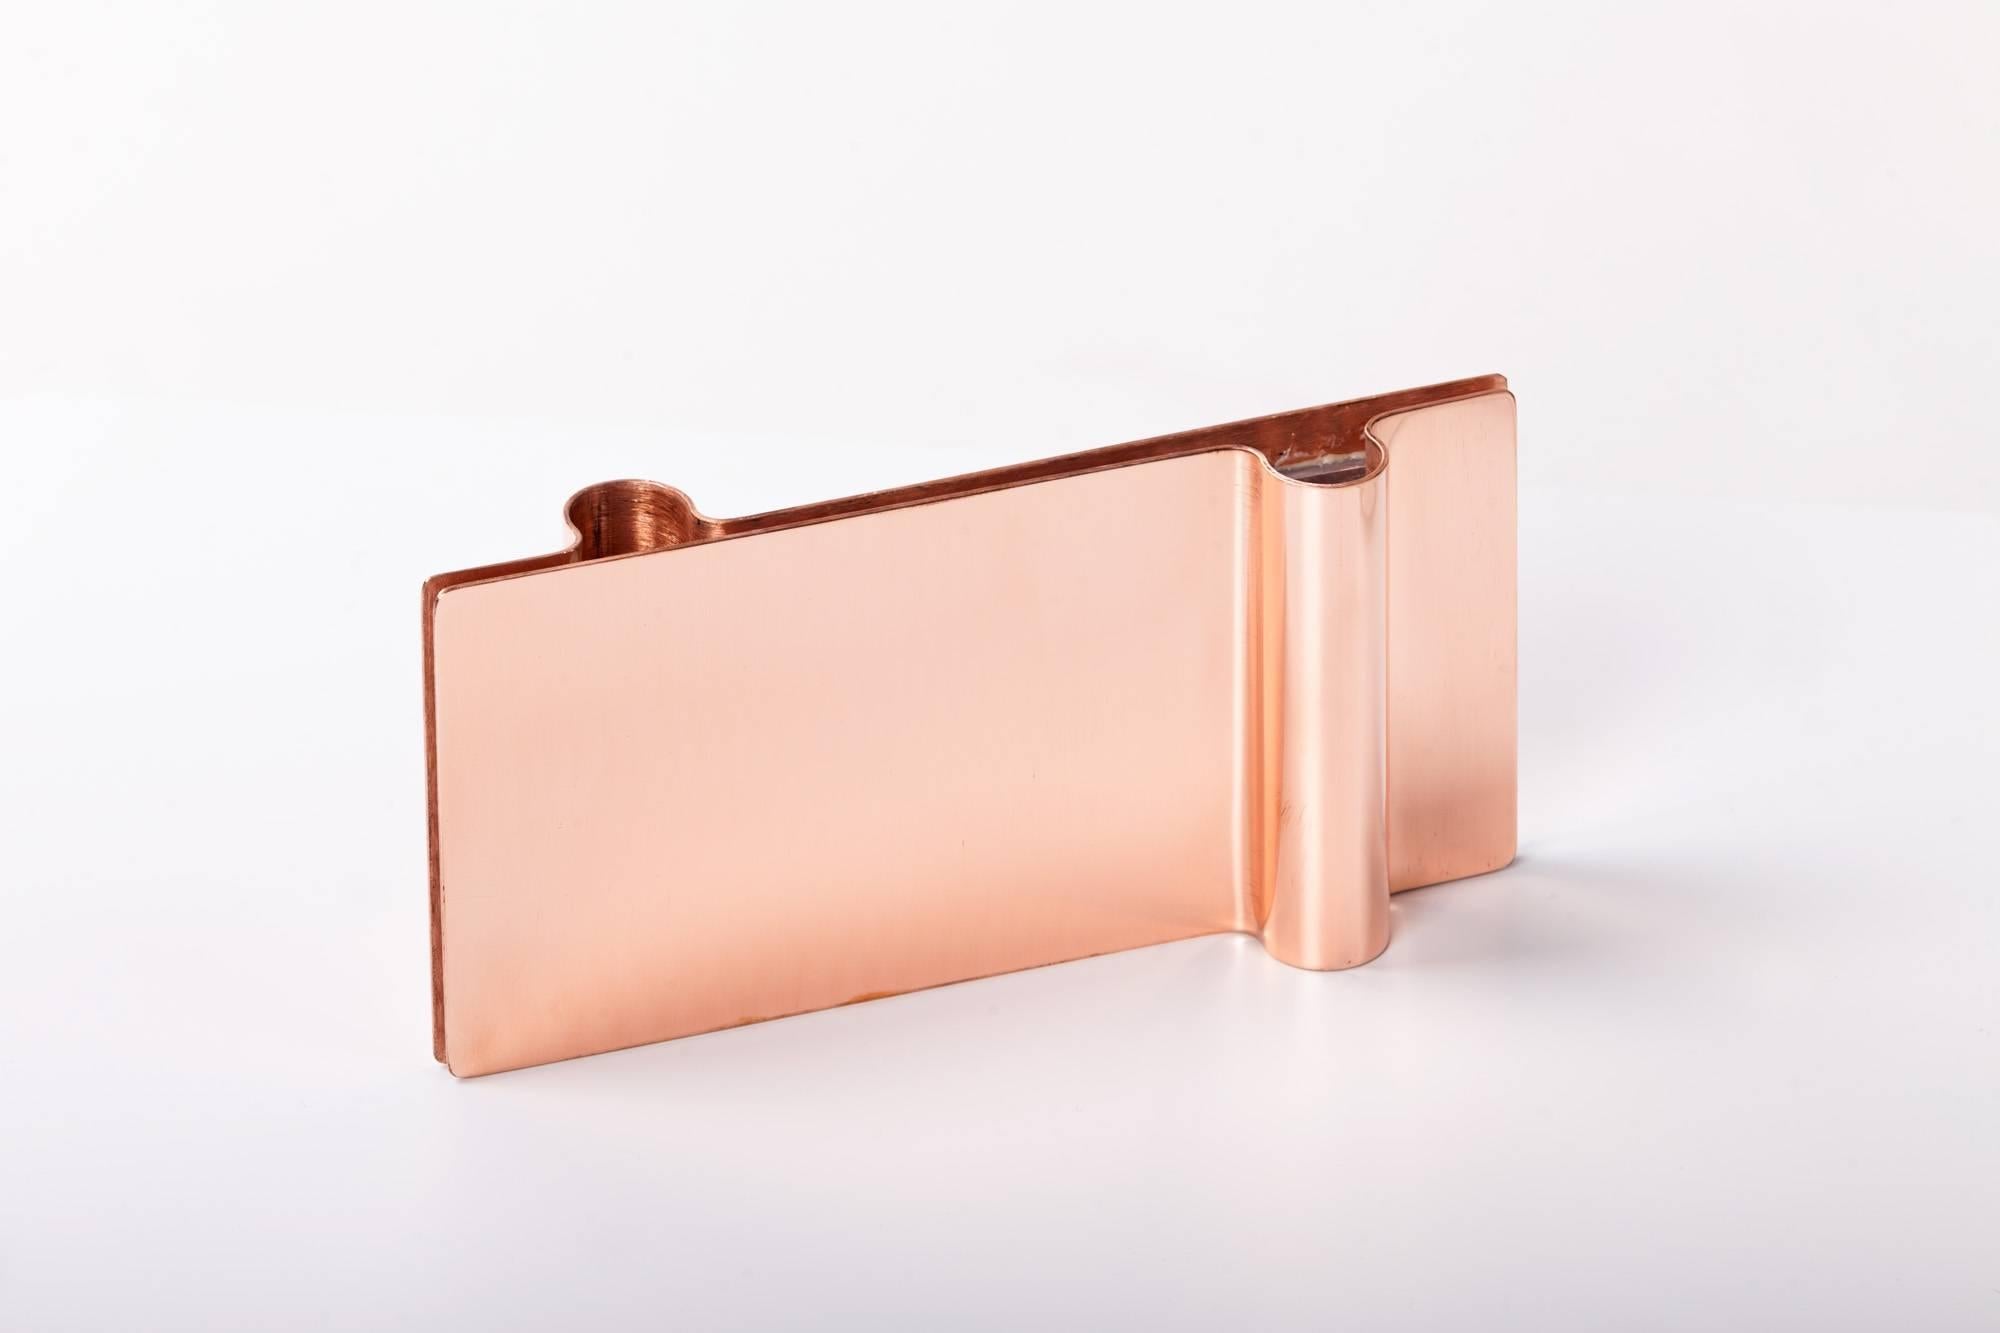 Folio candleholders are available in copper, brass or stainless steel. Its spontaneous oxidation will appear with time and is due to its natural finishings.
The structure is made by pairing a 2mm sheets of natural copper, brass or stainless steel.